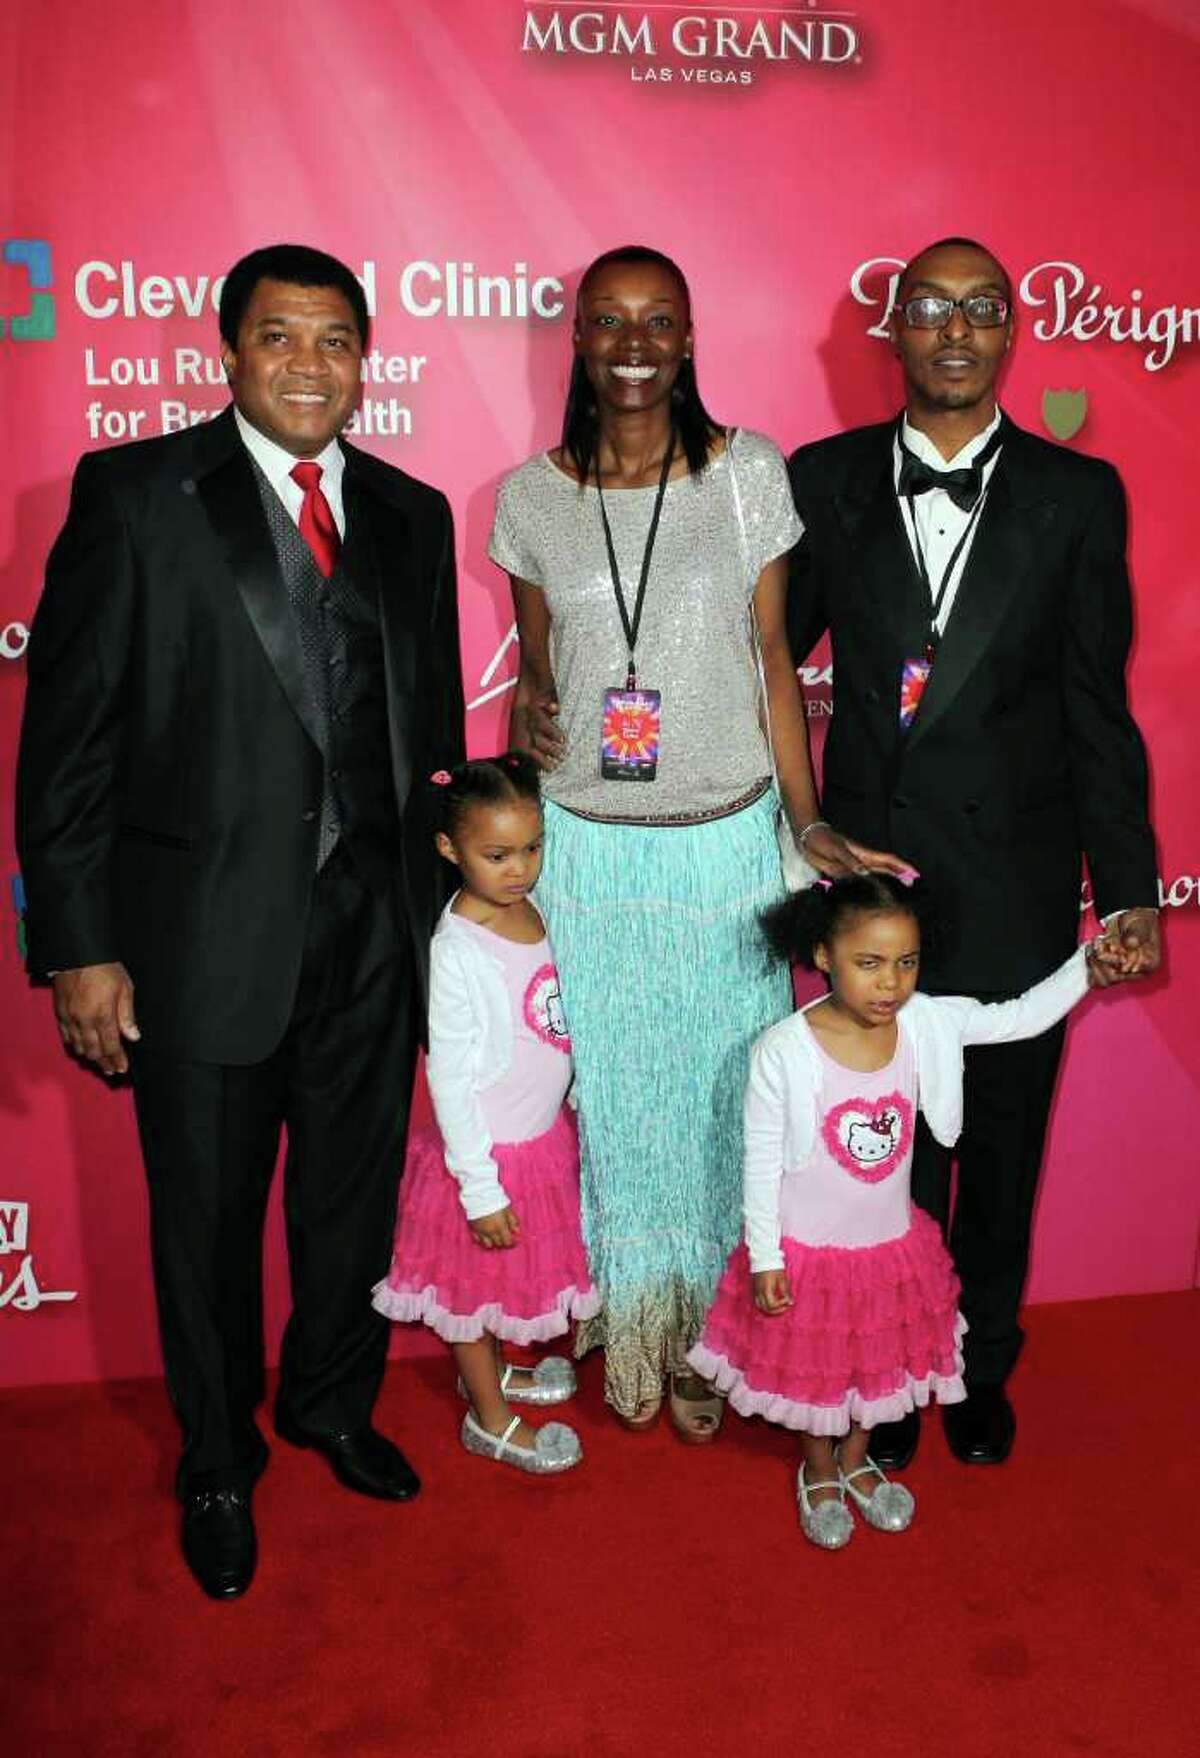 Members of the Ali family arrive at the Keep Memory Alive 16th Annual "Power of Love Gala" honoring Muhammad Ali with his 70th birthday celebration on Saturday, Feb. 18, 2012, in Las Vegas. (AP Photo/Jeff Bottari)